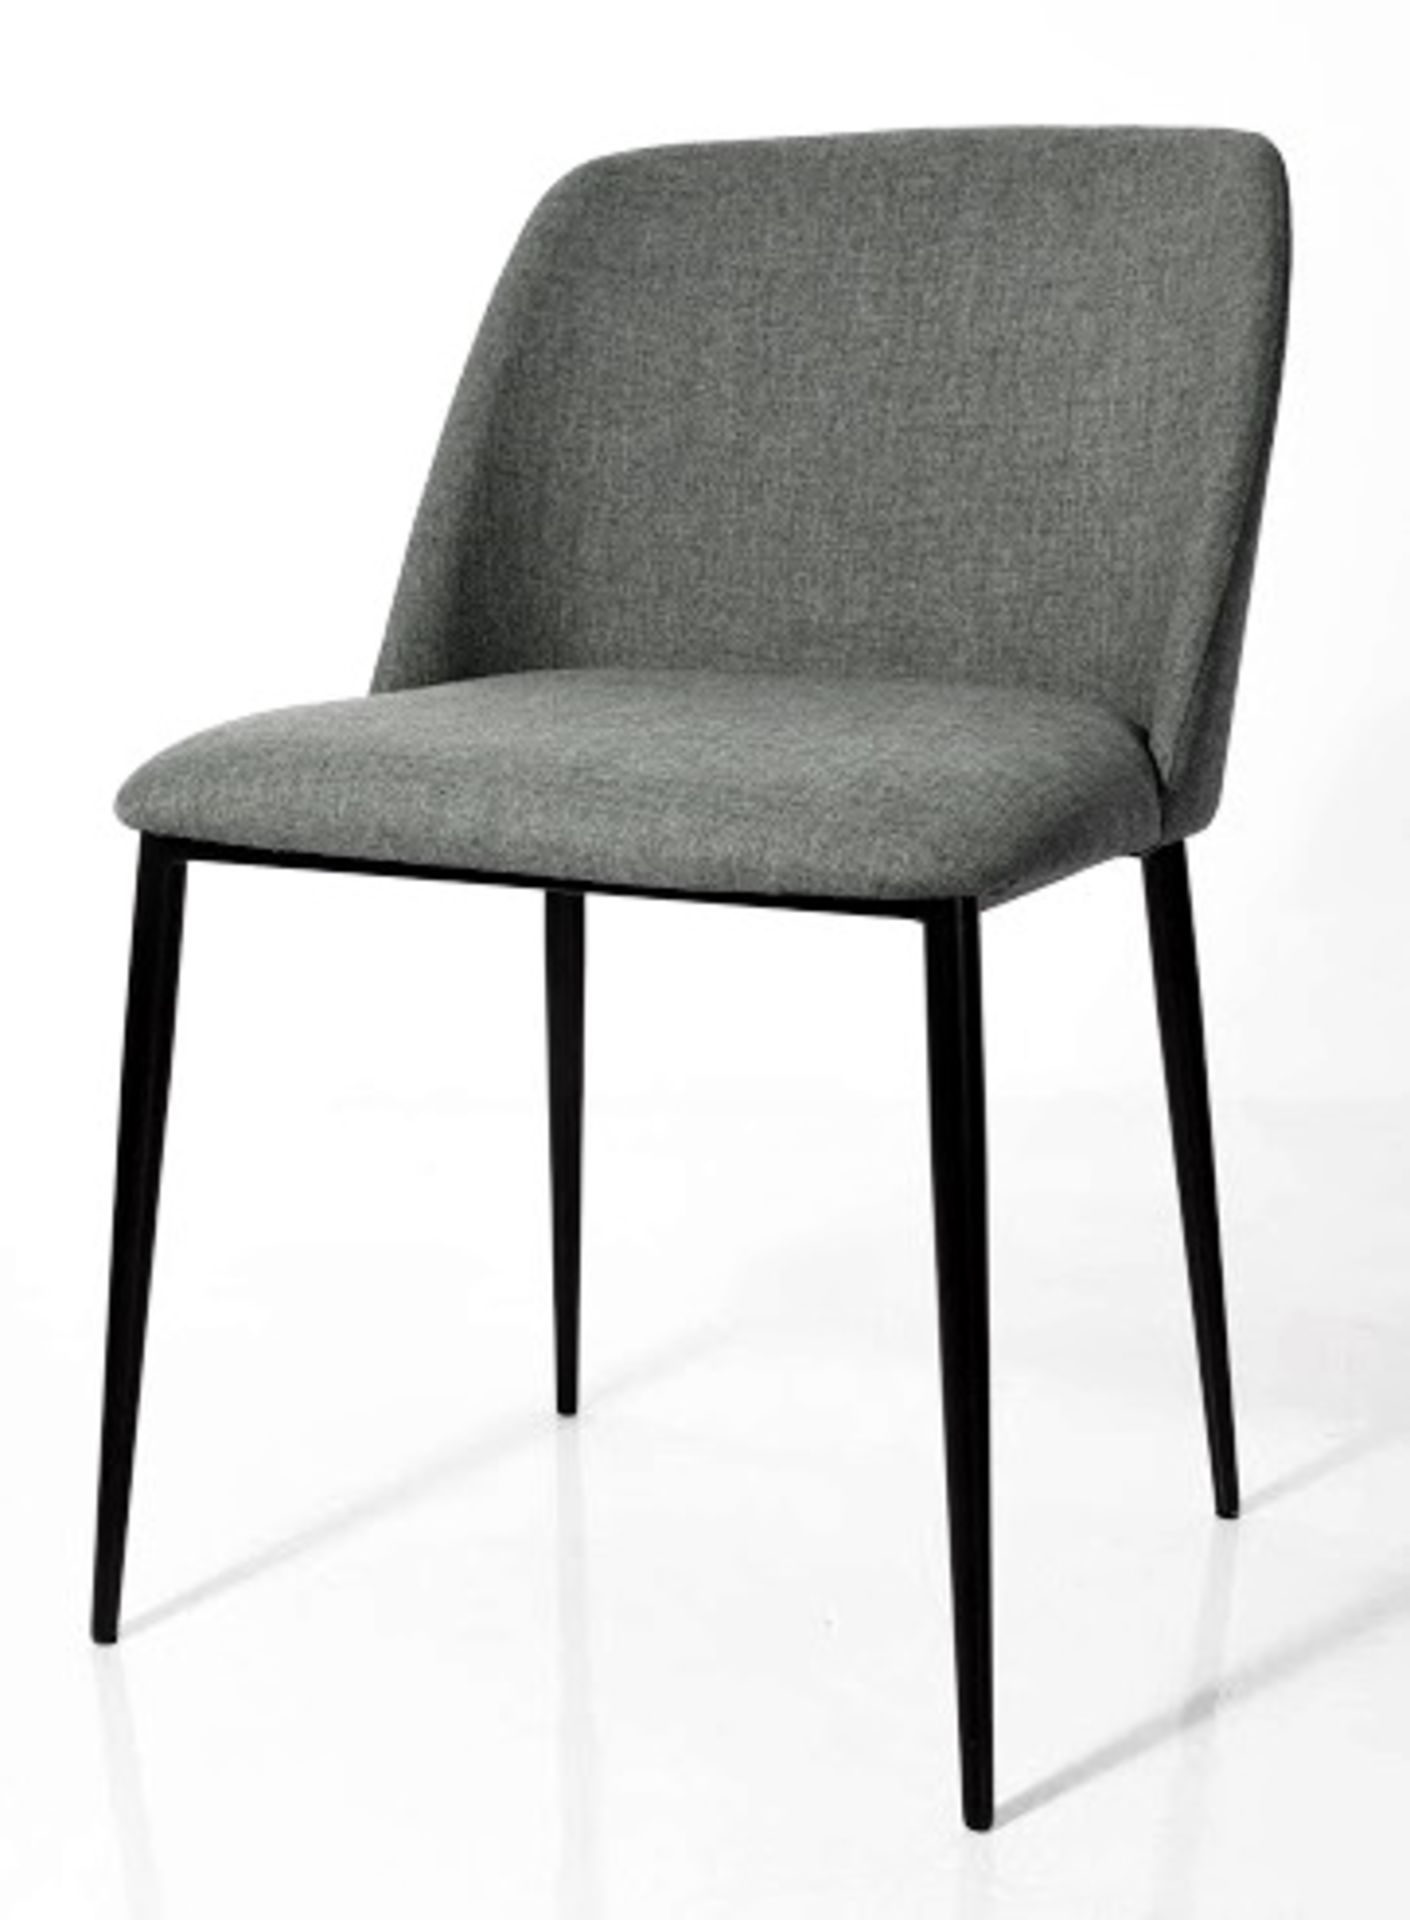 6 x FLANDERS Upholstered Contemporary Dining Chairs In Grey Fabric - Image 2 of 2